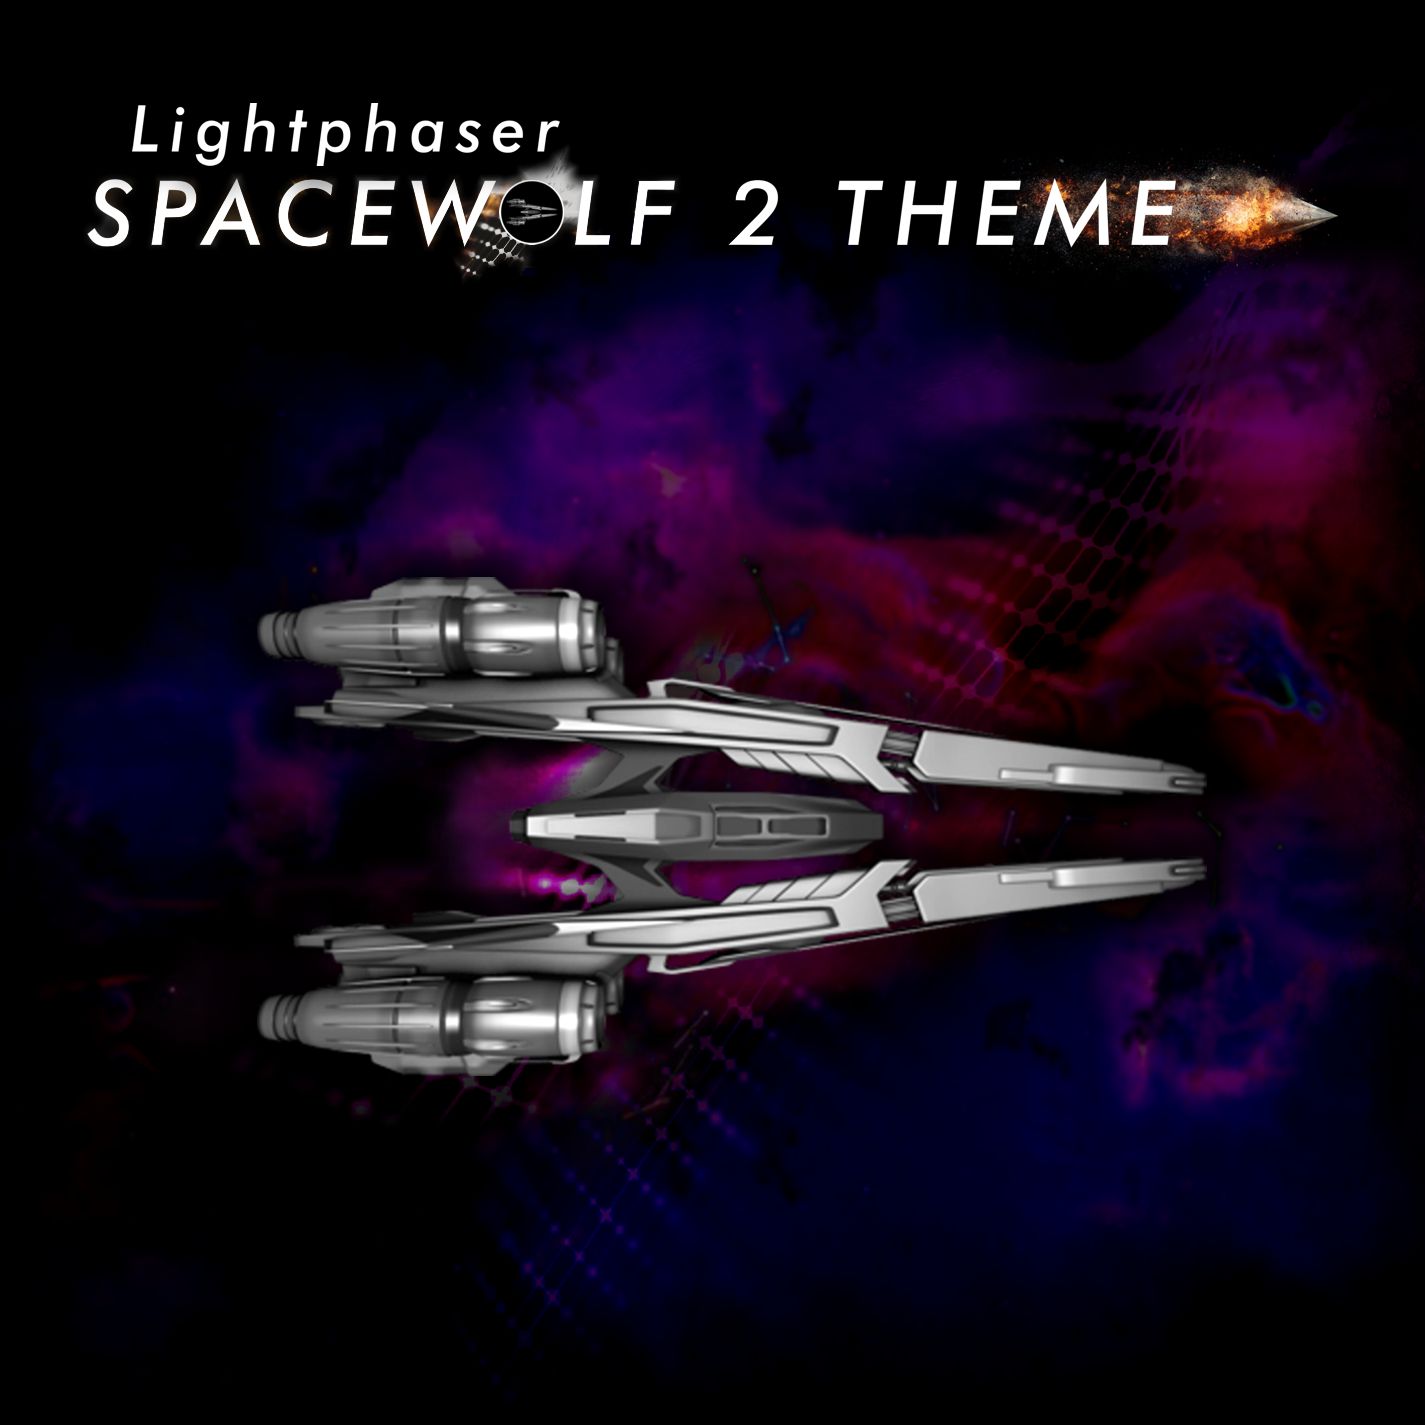 Spacewolf 2 Theme is coming on 4th of November!